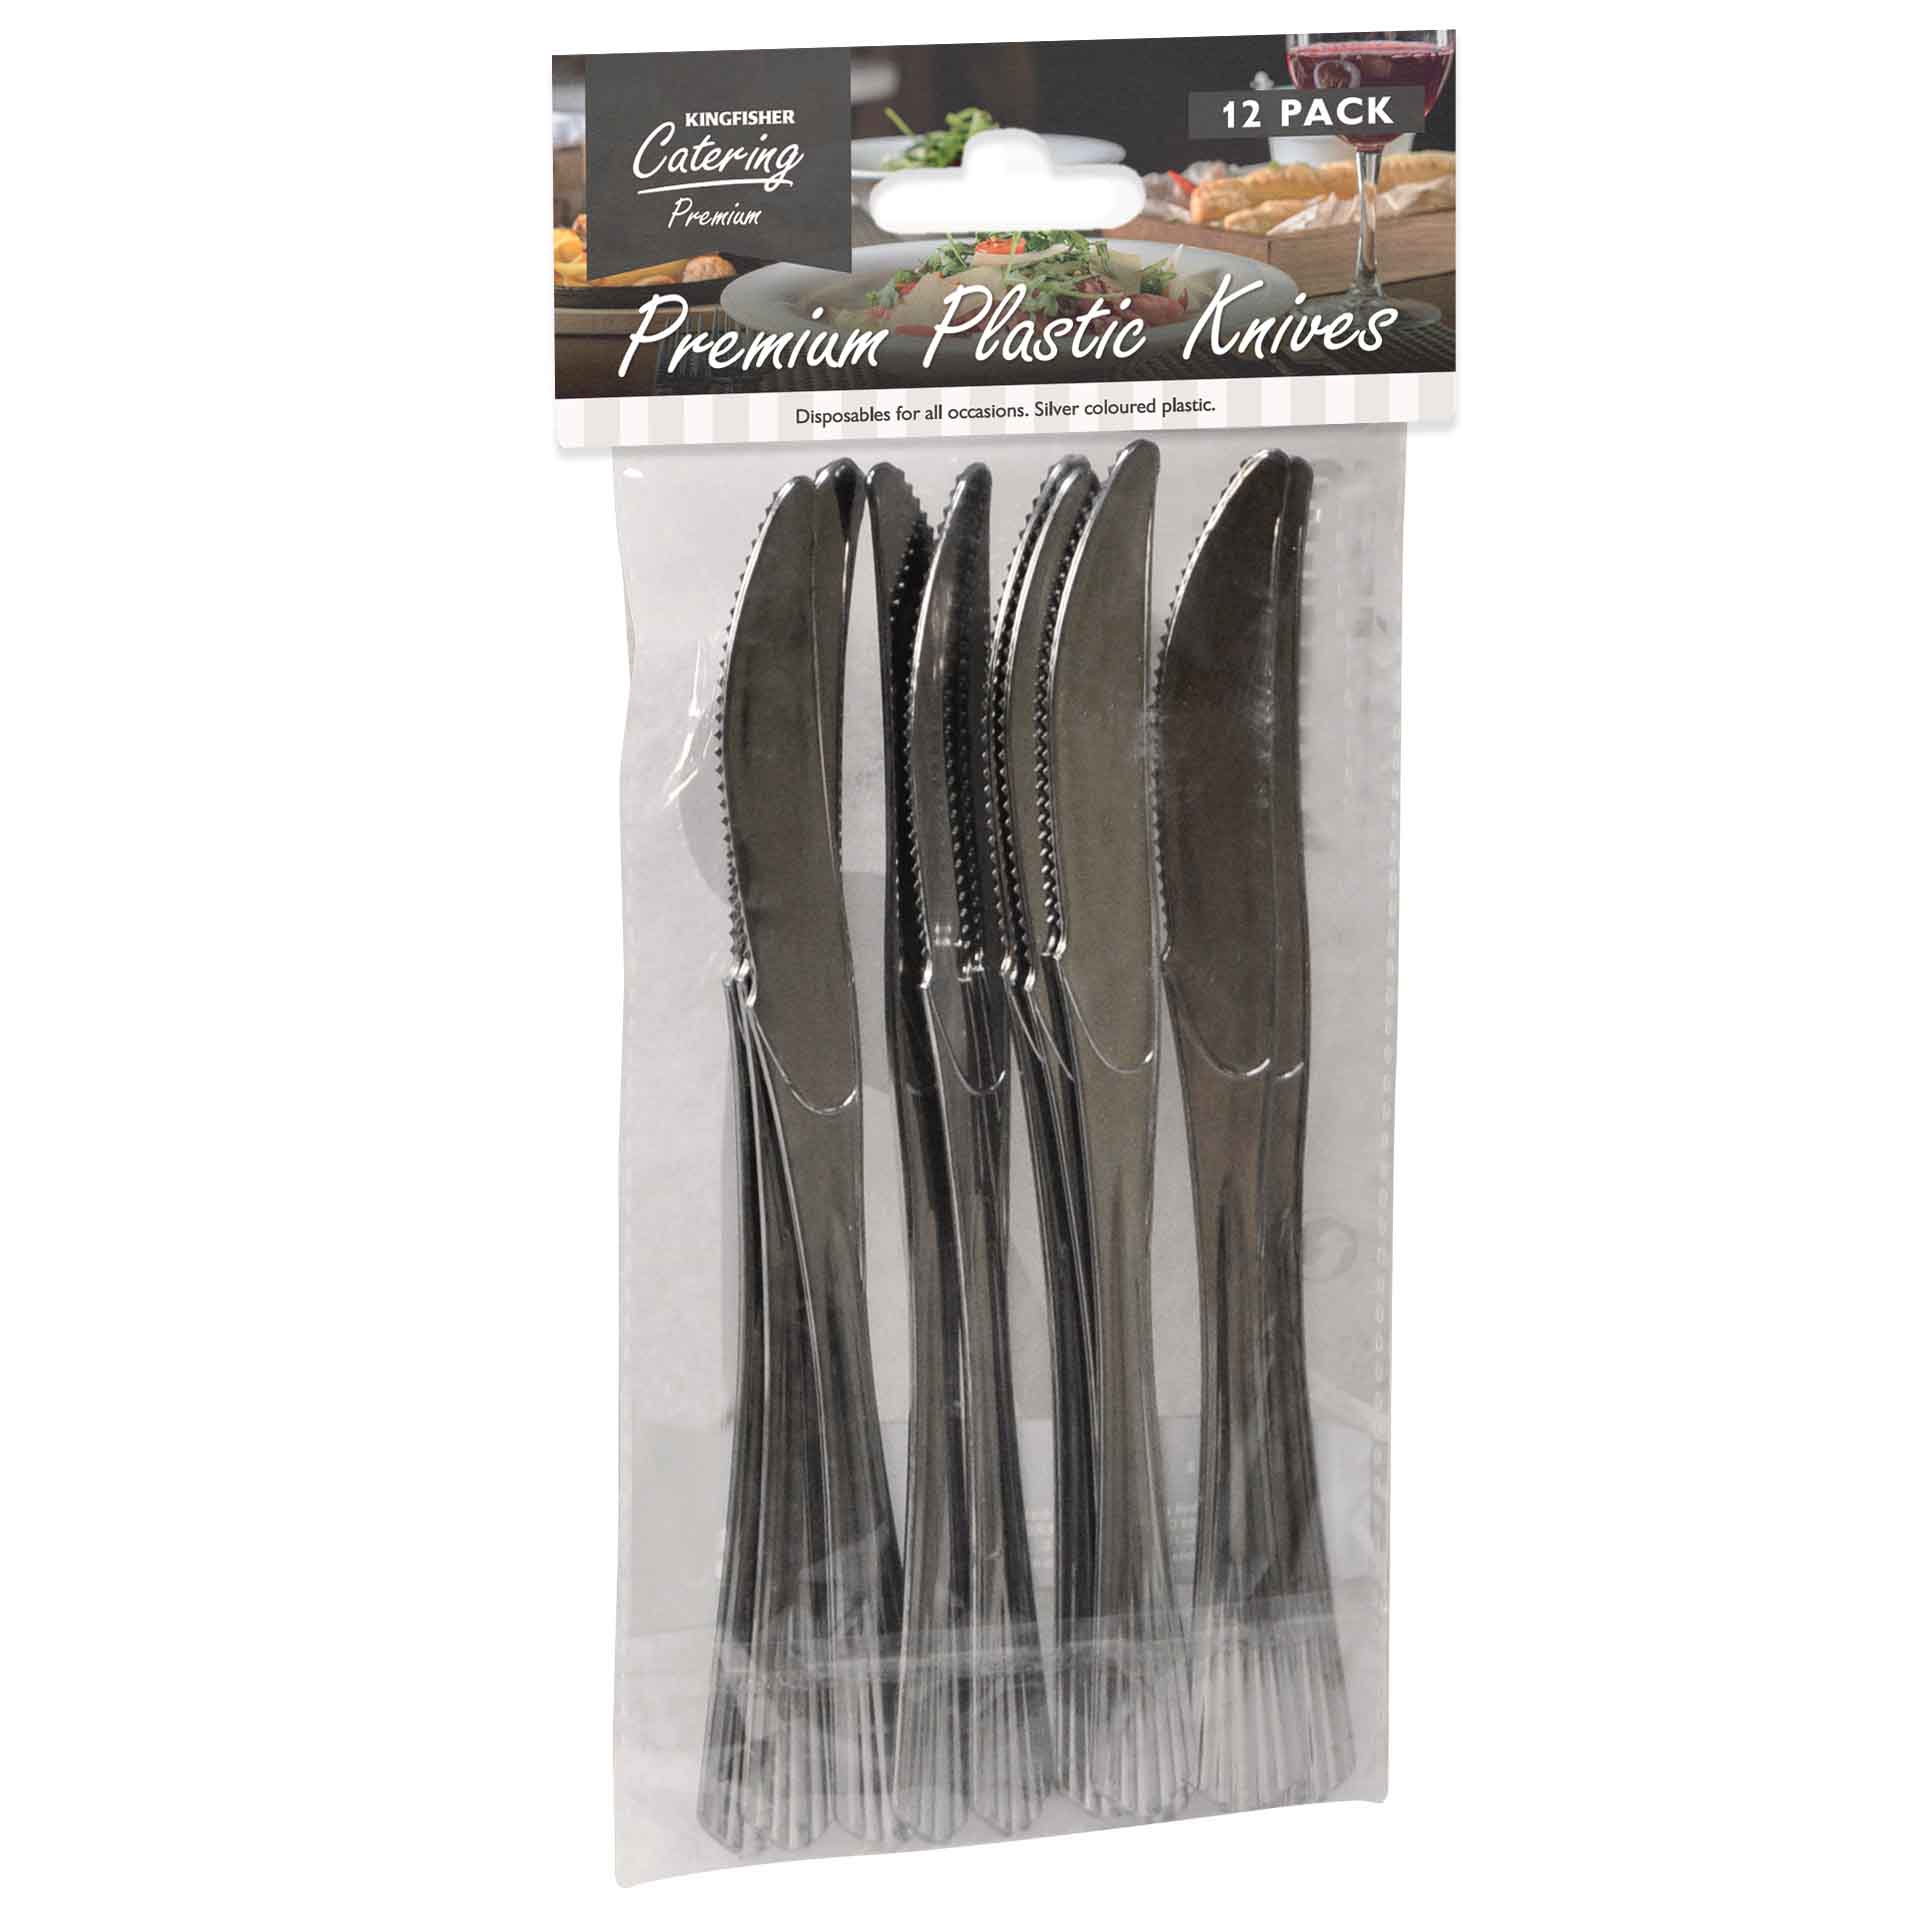 K/F SILVER PLASTIC KNIVES 12 PACK